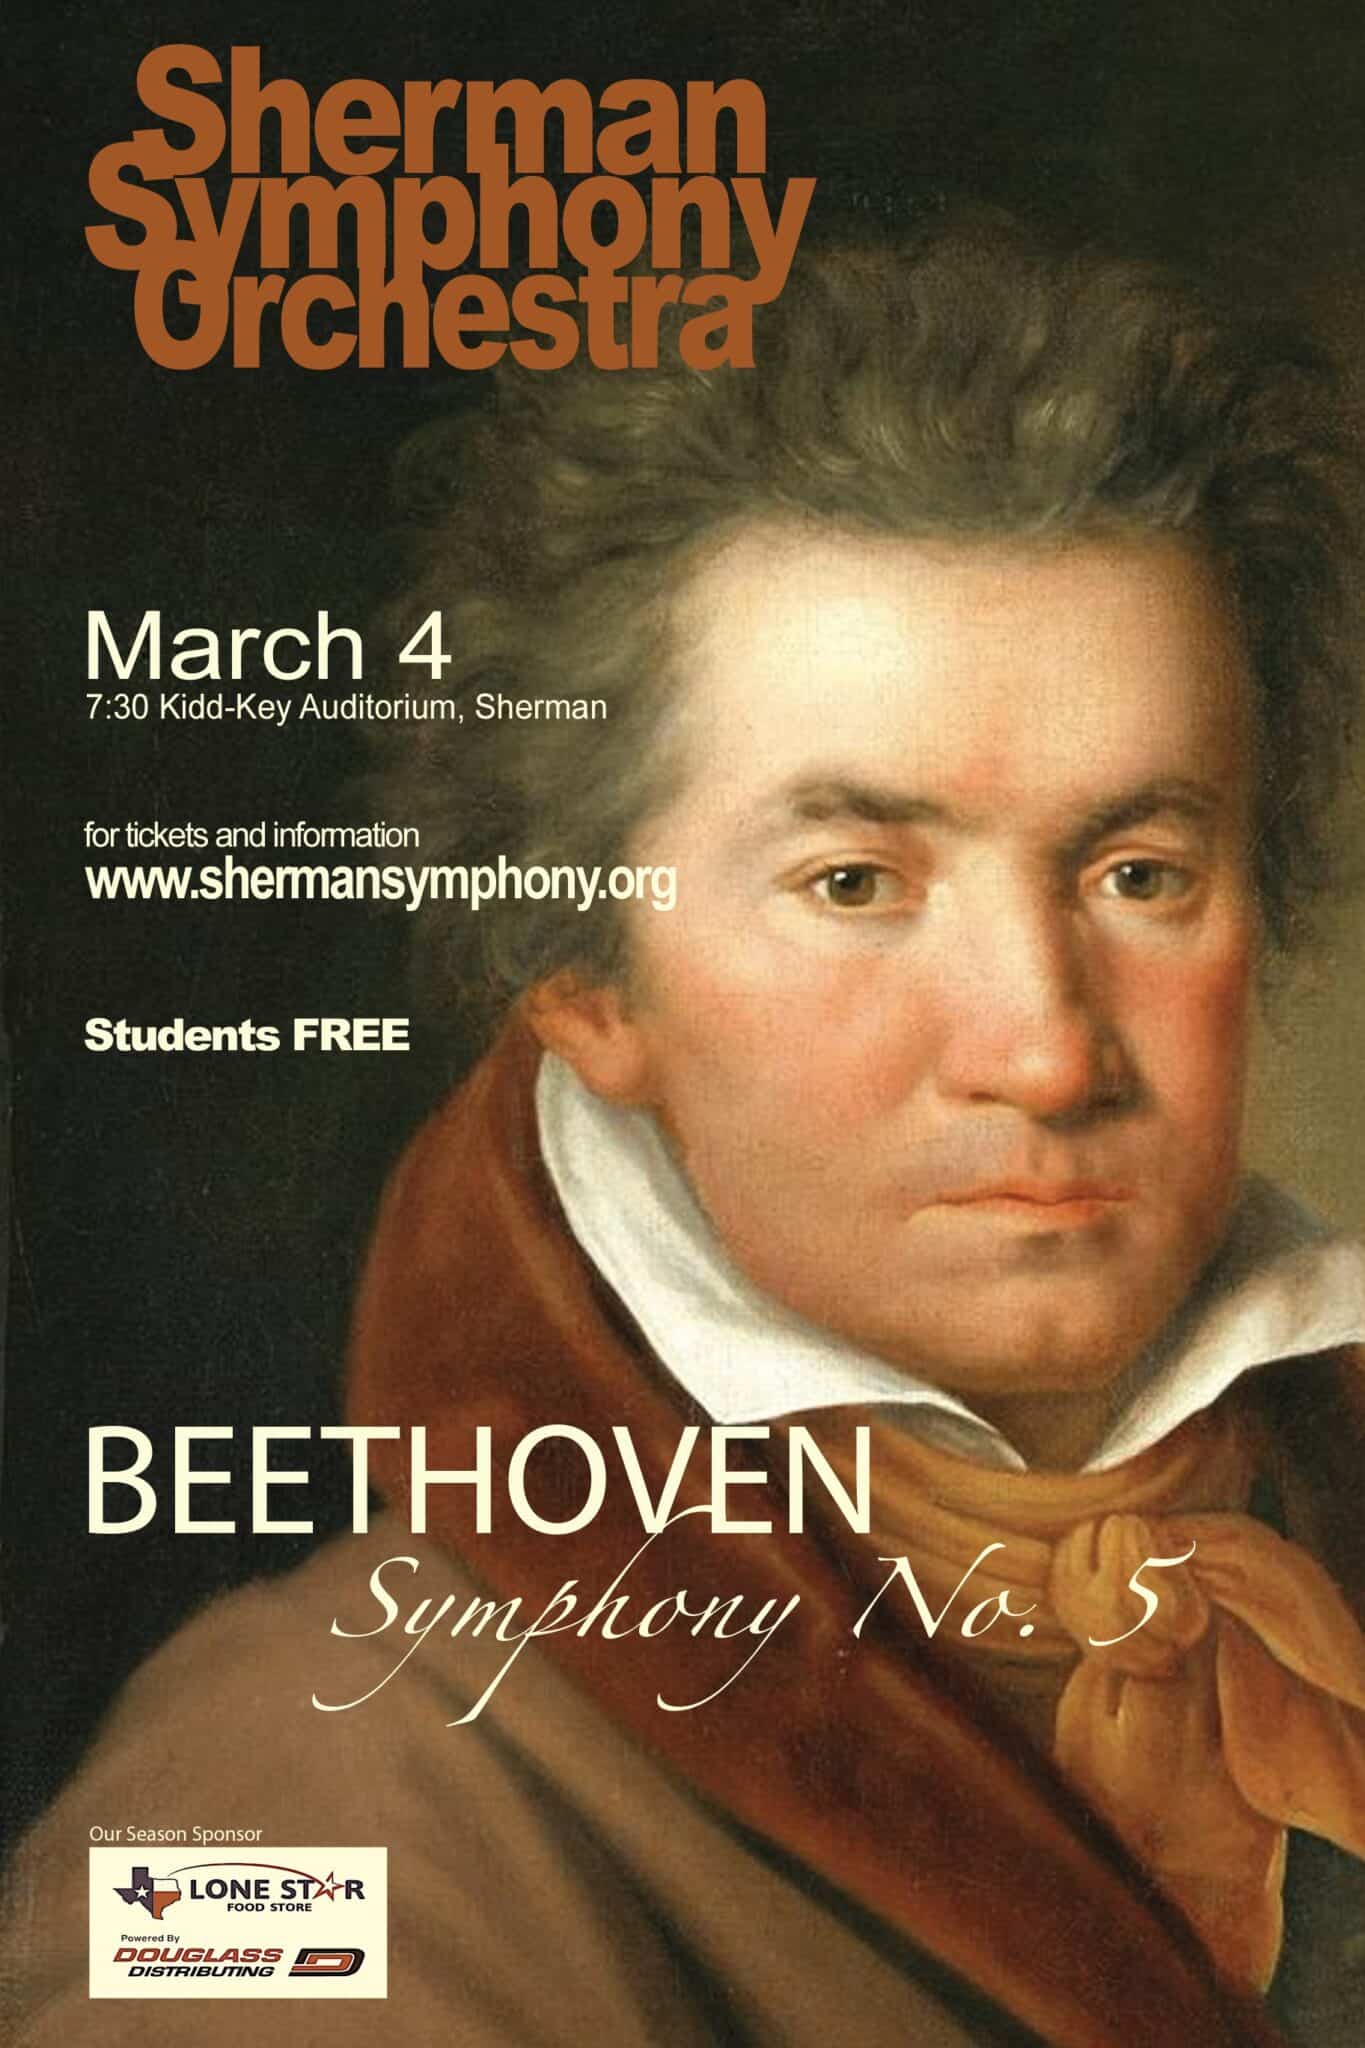 March 4: Mendelssohn and Beethoven